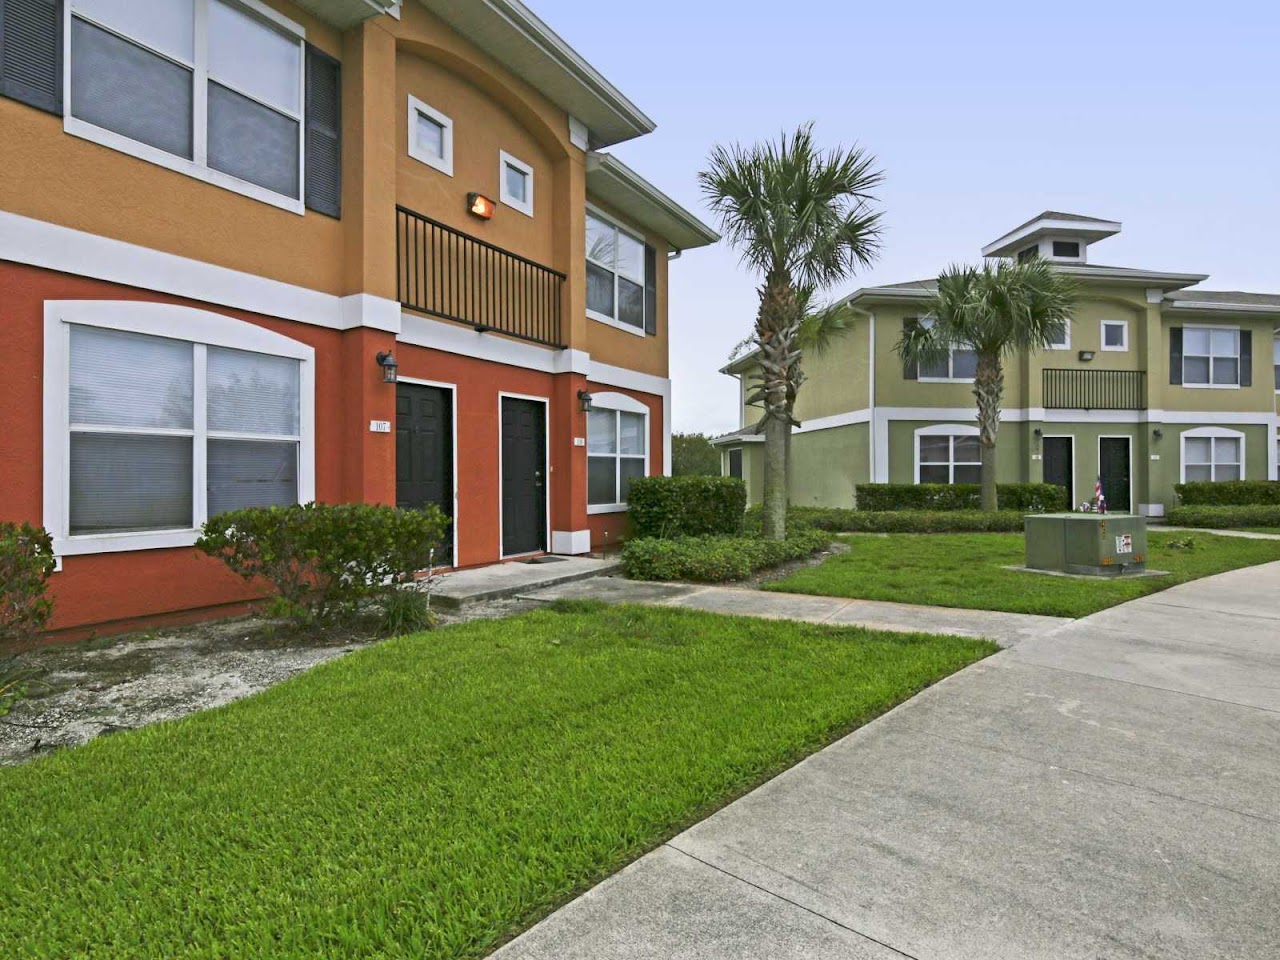 Photo of PALMS AT VERO BEACH. Affordable housing located at 1210 FOURTH TER VERO BEACH, FL 32960